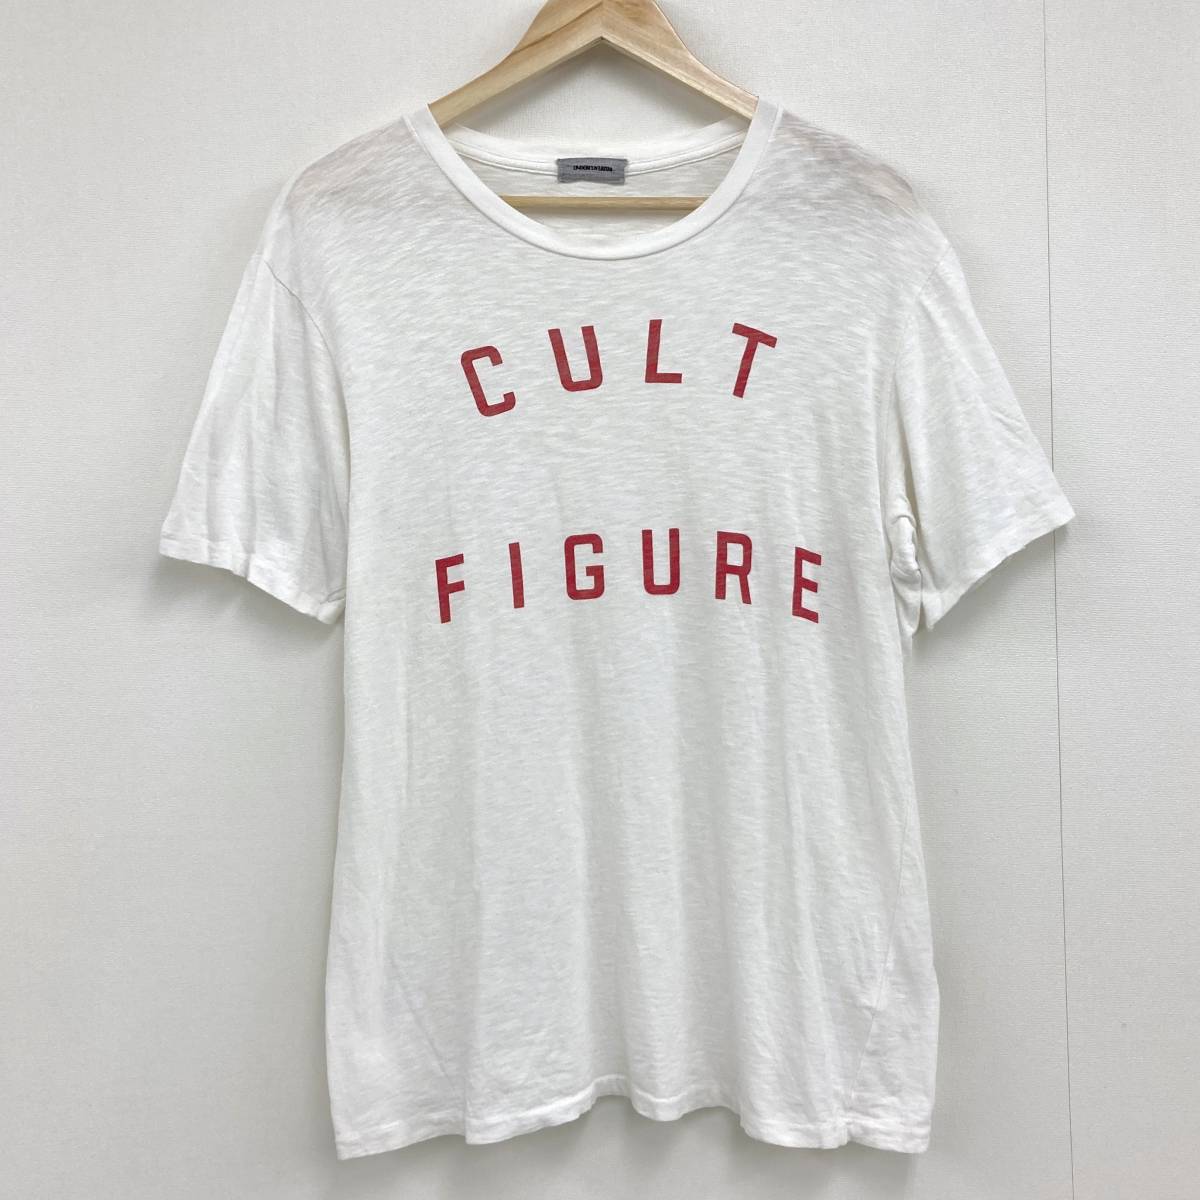 12SS UNDERCOVER OPENSTRINGS CULT FIGURE 半袖 Tシャツ ホワイト 白 2サイズ UNDER COVER アンダーカバー カットソー Tee archive 3040081